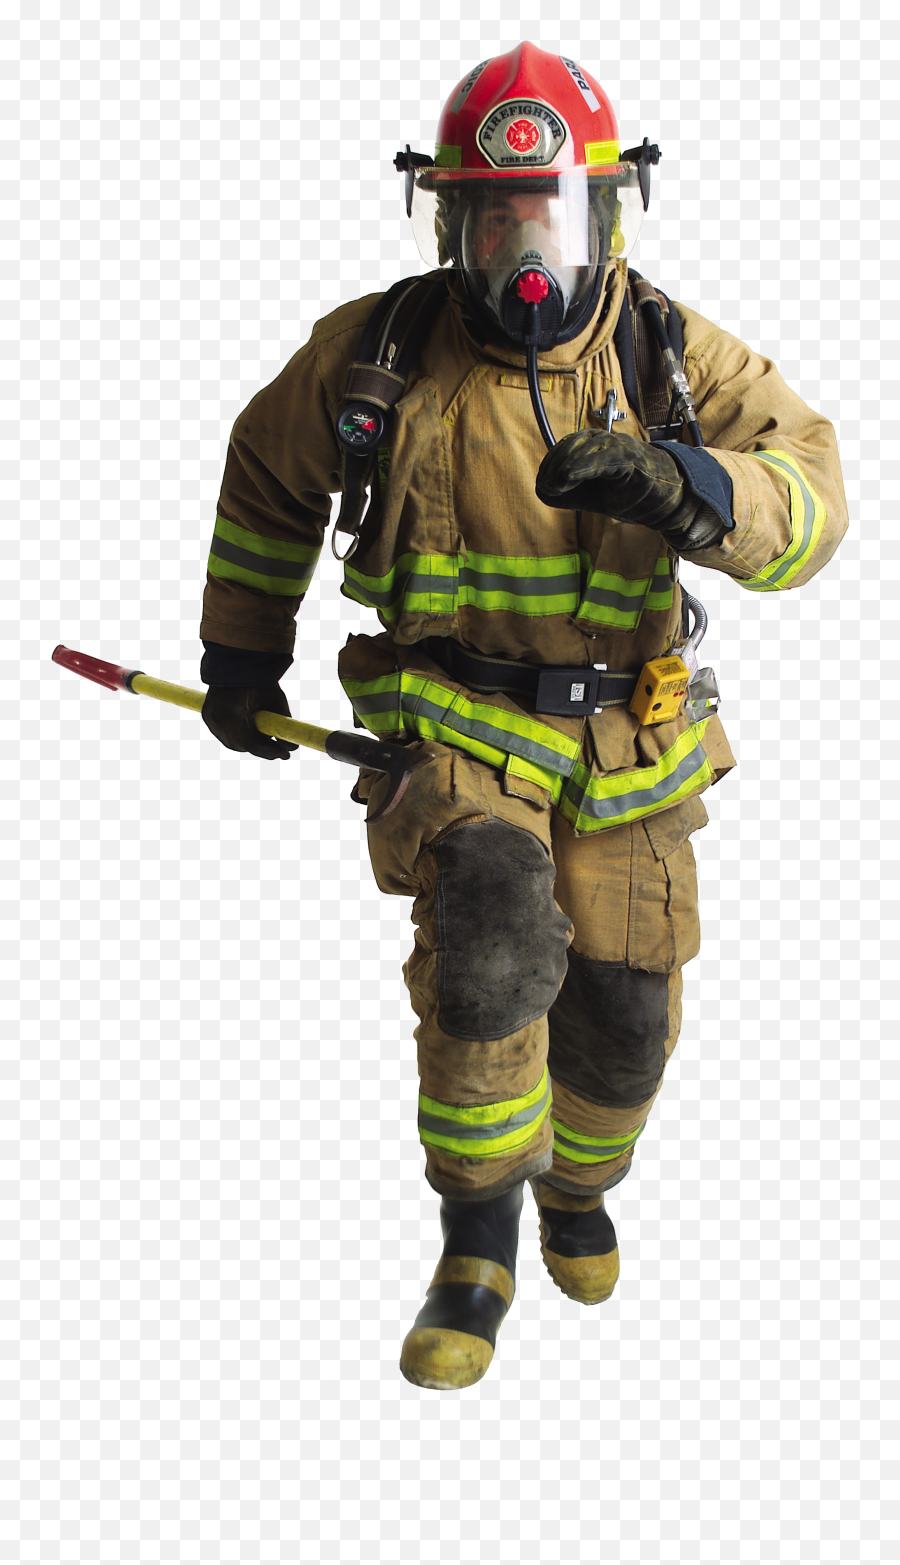 Firefighter Png Image - Firefighter Png,Firefighter Png